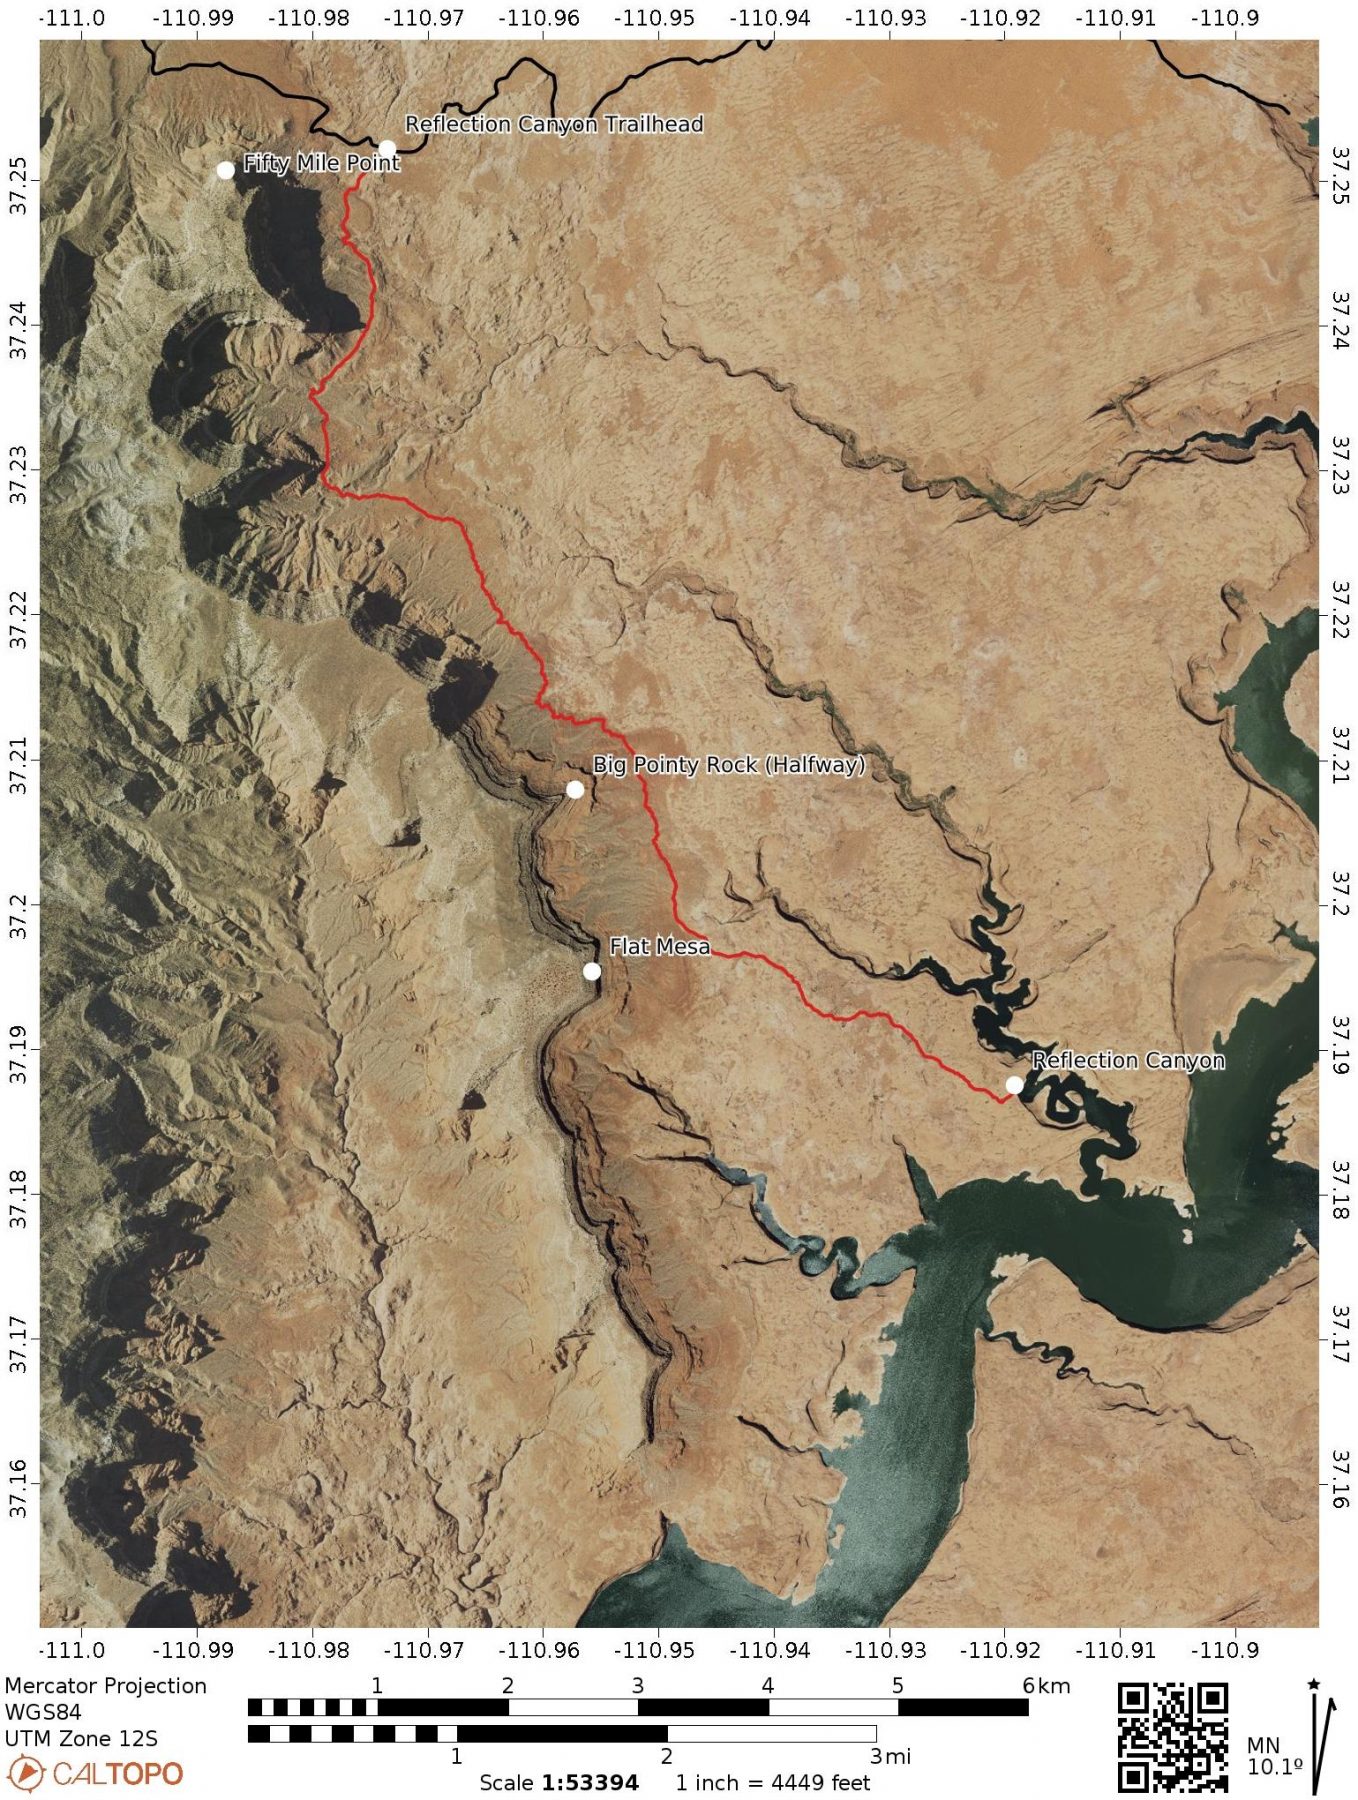 Reflection Canyon aerial topographic map